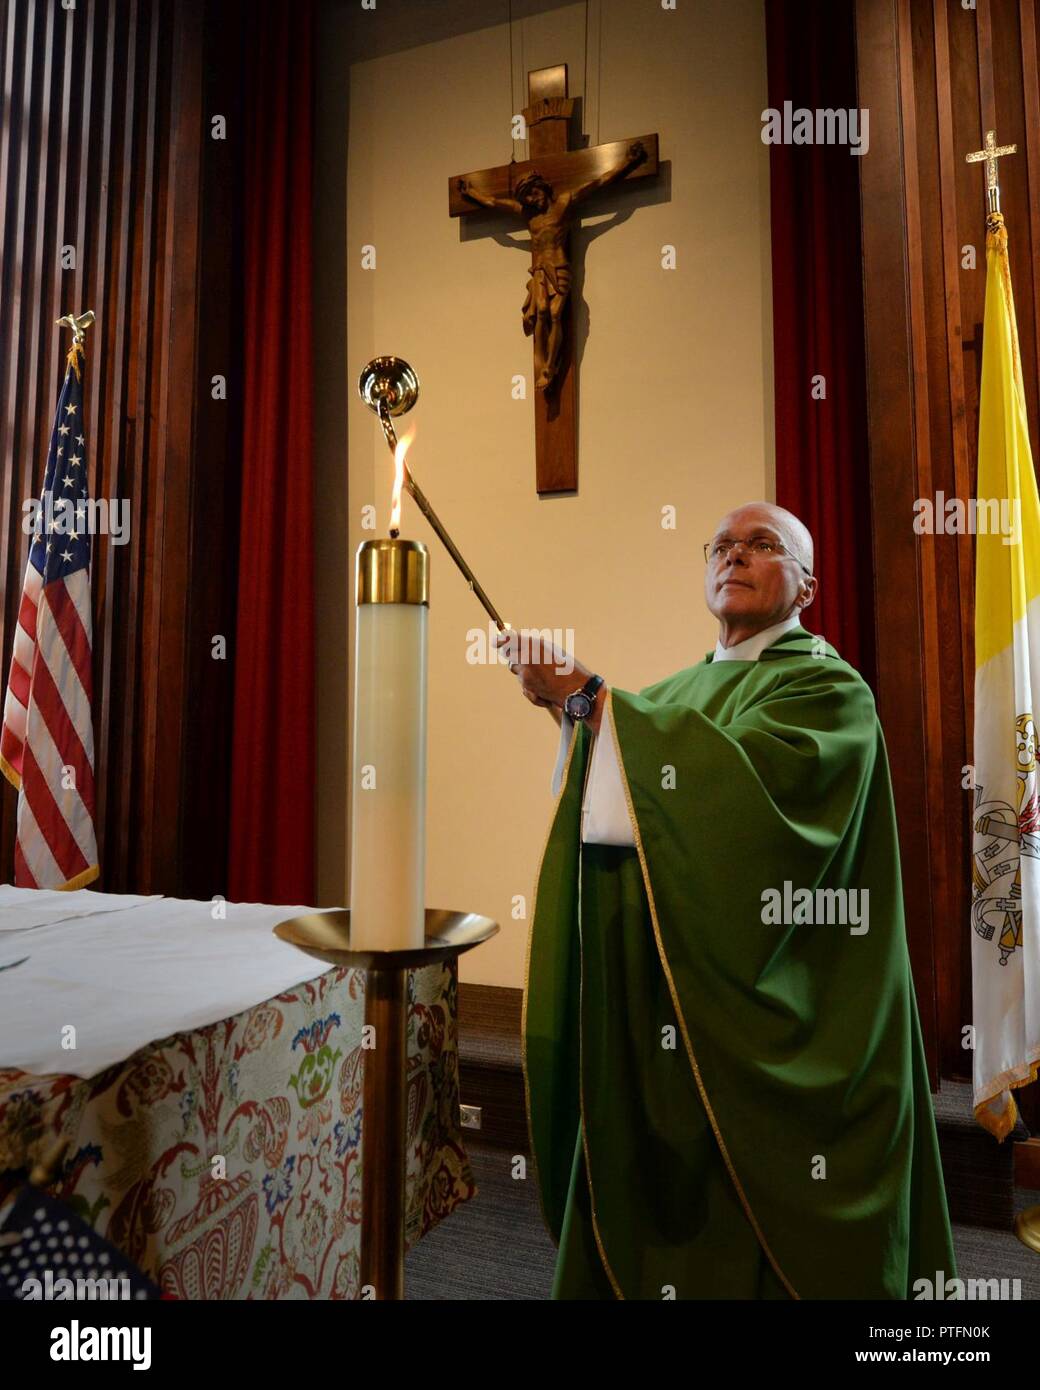 U.S. Air Force Maj. (Father) Tom Gills, 88th Air Base Wing Chaplain Service’s branch chief of Parish Ministries, lights a candle -symbolic for the light of the world-, prior to a Catholic mass service held at the Kittyhawk chapel on Wright-Patterson Air Force Base, Ohio, July 12, 2017. The Air Force Chaplain Corps ministry expands beyond providing religious ministry for those of like faith and practice to facilitating all religious practices and caring for every Airman, including those who observe no religion at all. Stock Photo